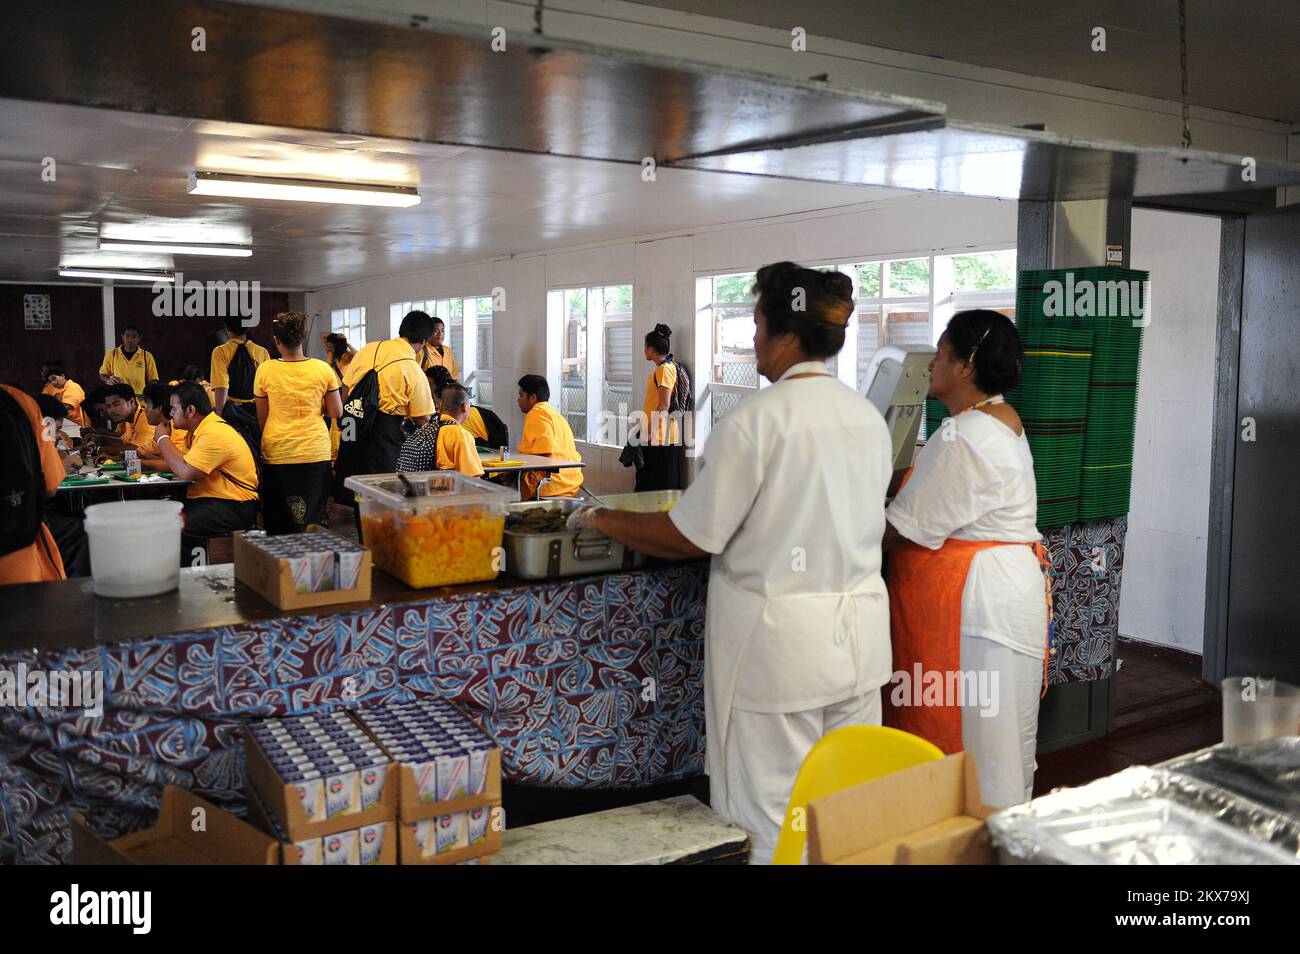 Cafeteria Workers Serve Breakfast to Students. American Samoa Earthquake, Tsunami, and Flooding. Photographs Relating to Disasters and Emergency Management Programs, Activities, and Officials Stock Photo